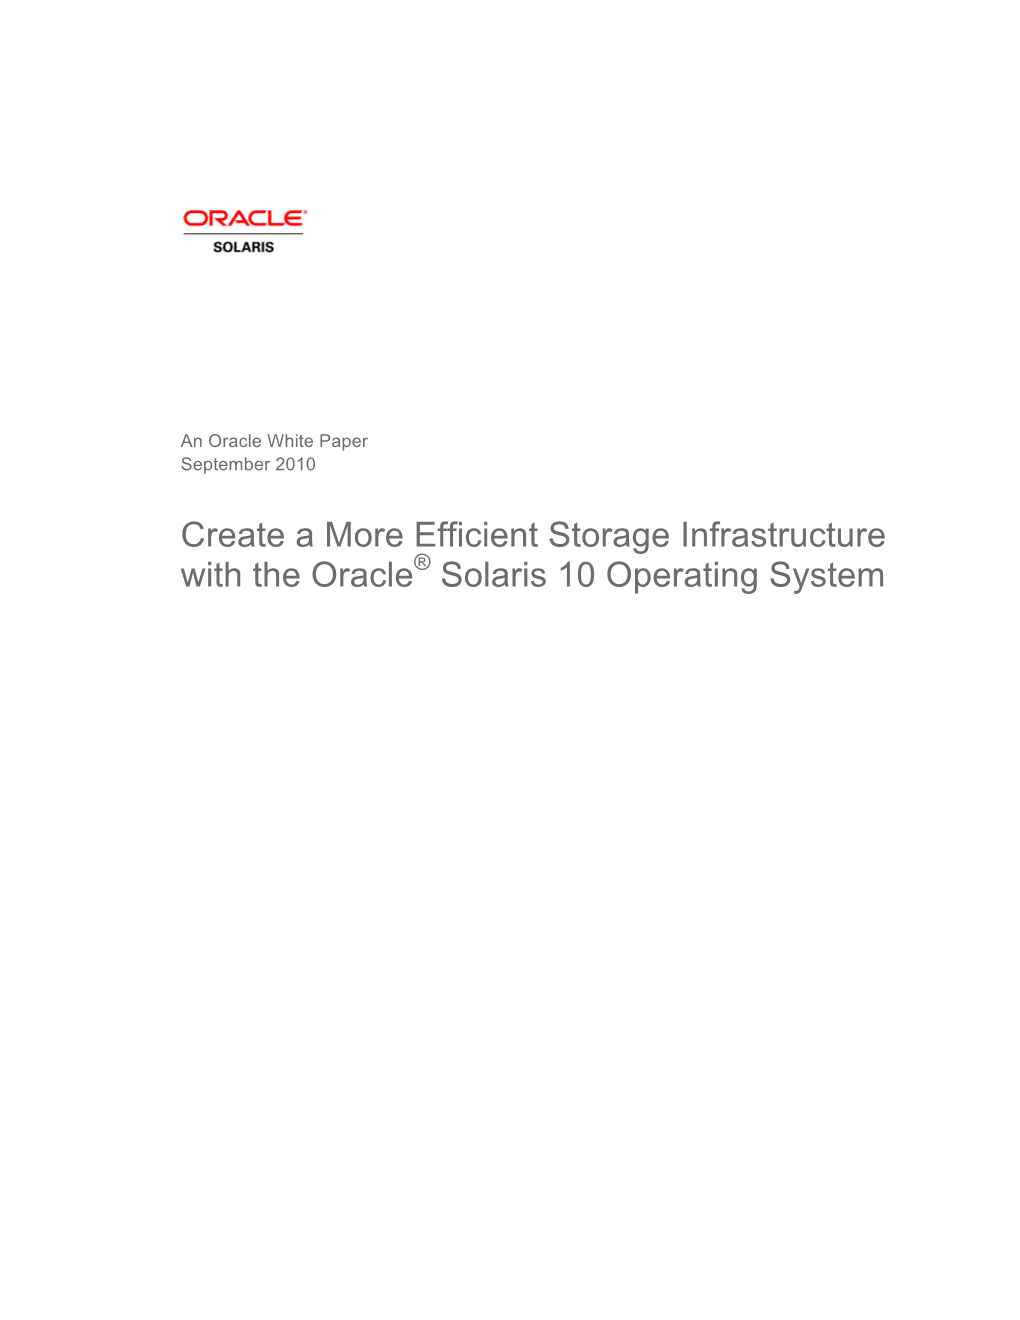 Create a More Efficient Storage Infrastructure with the Oracle® Solaris 10 Operating System